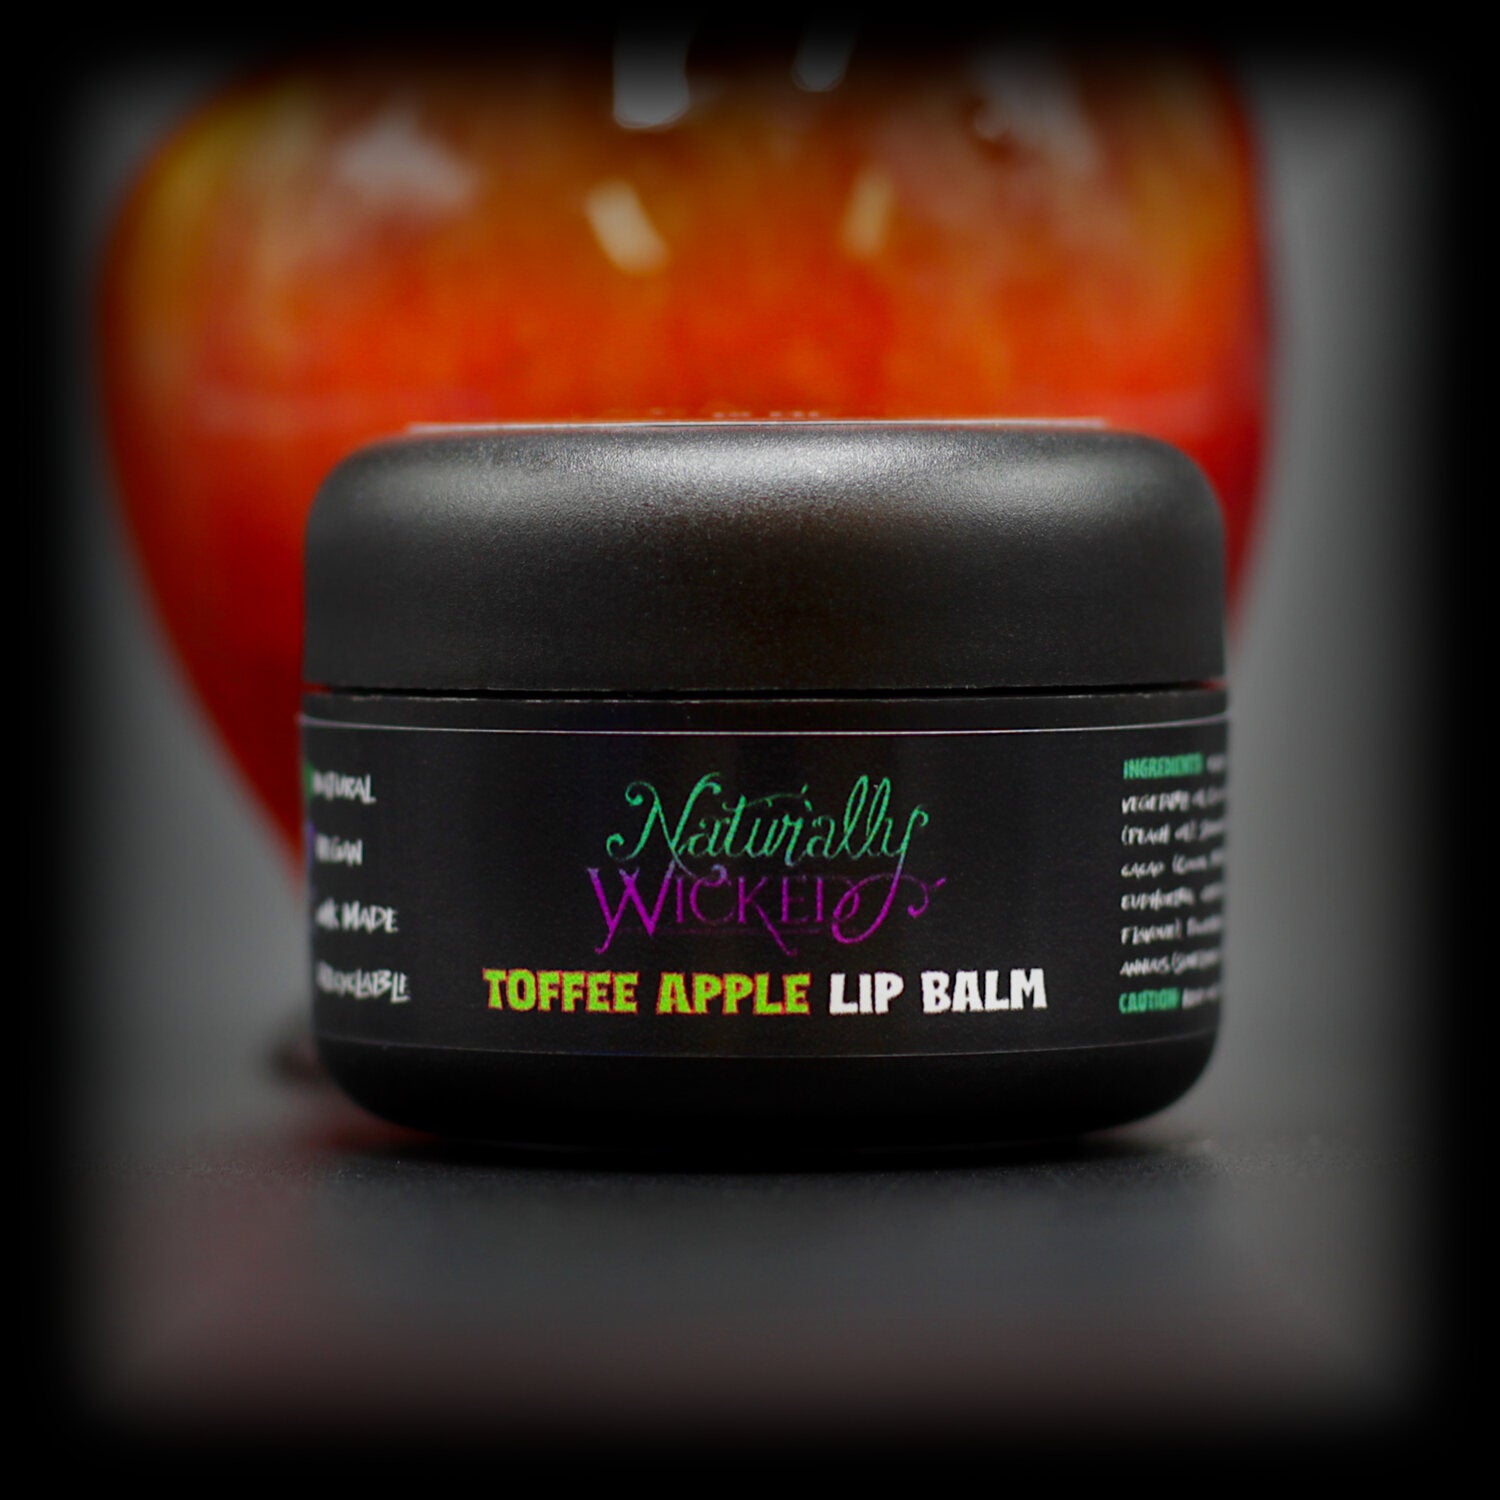 Naturally Wicked Toffee Apple Lip Balm In Front Of Rich Red Toffee Covered Apple